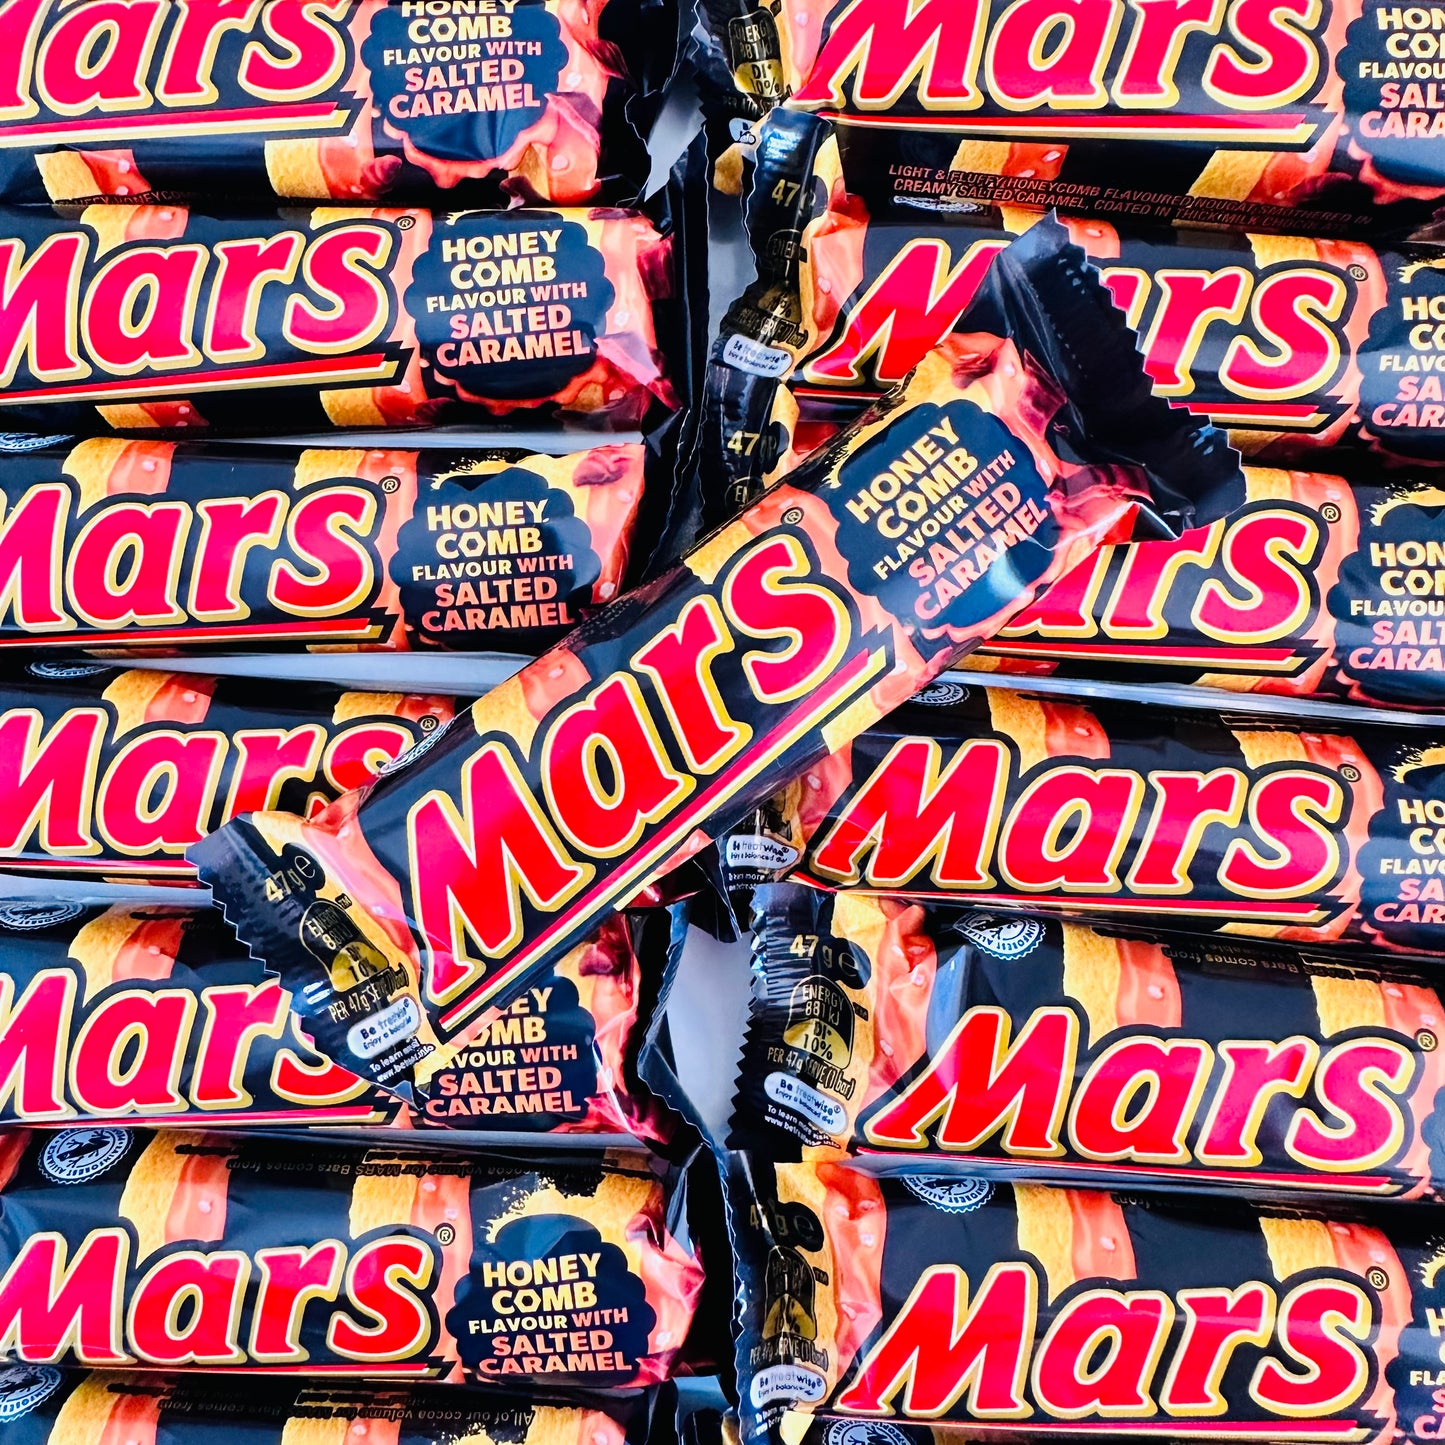 Mars Honeycomb Flavour With Salted Caramel Chocolate Bar 47g